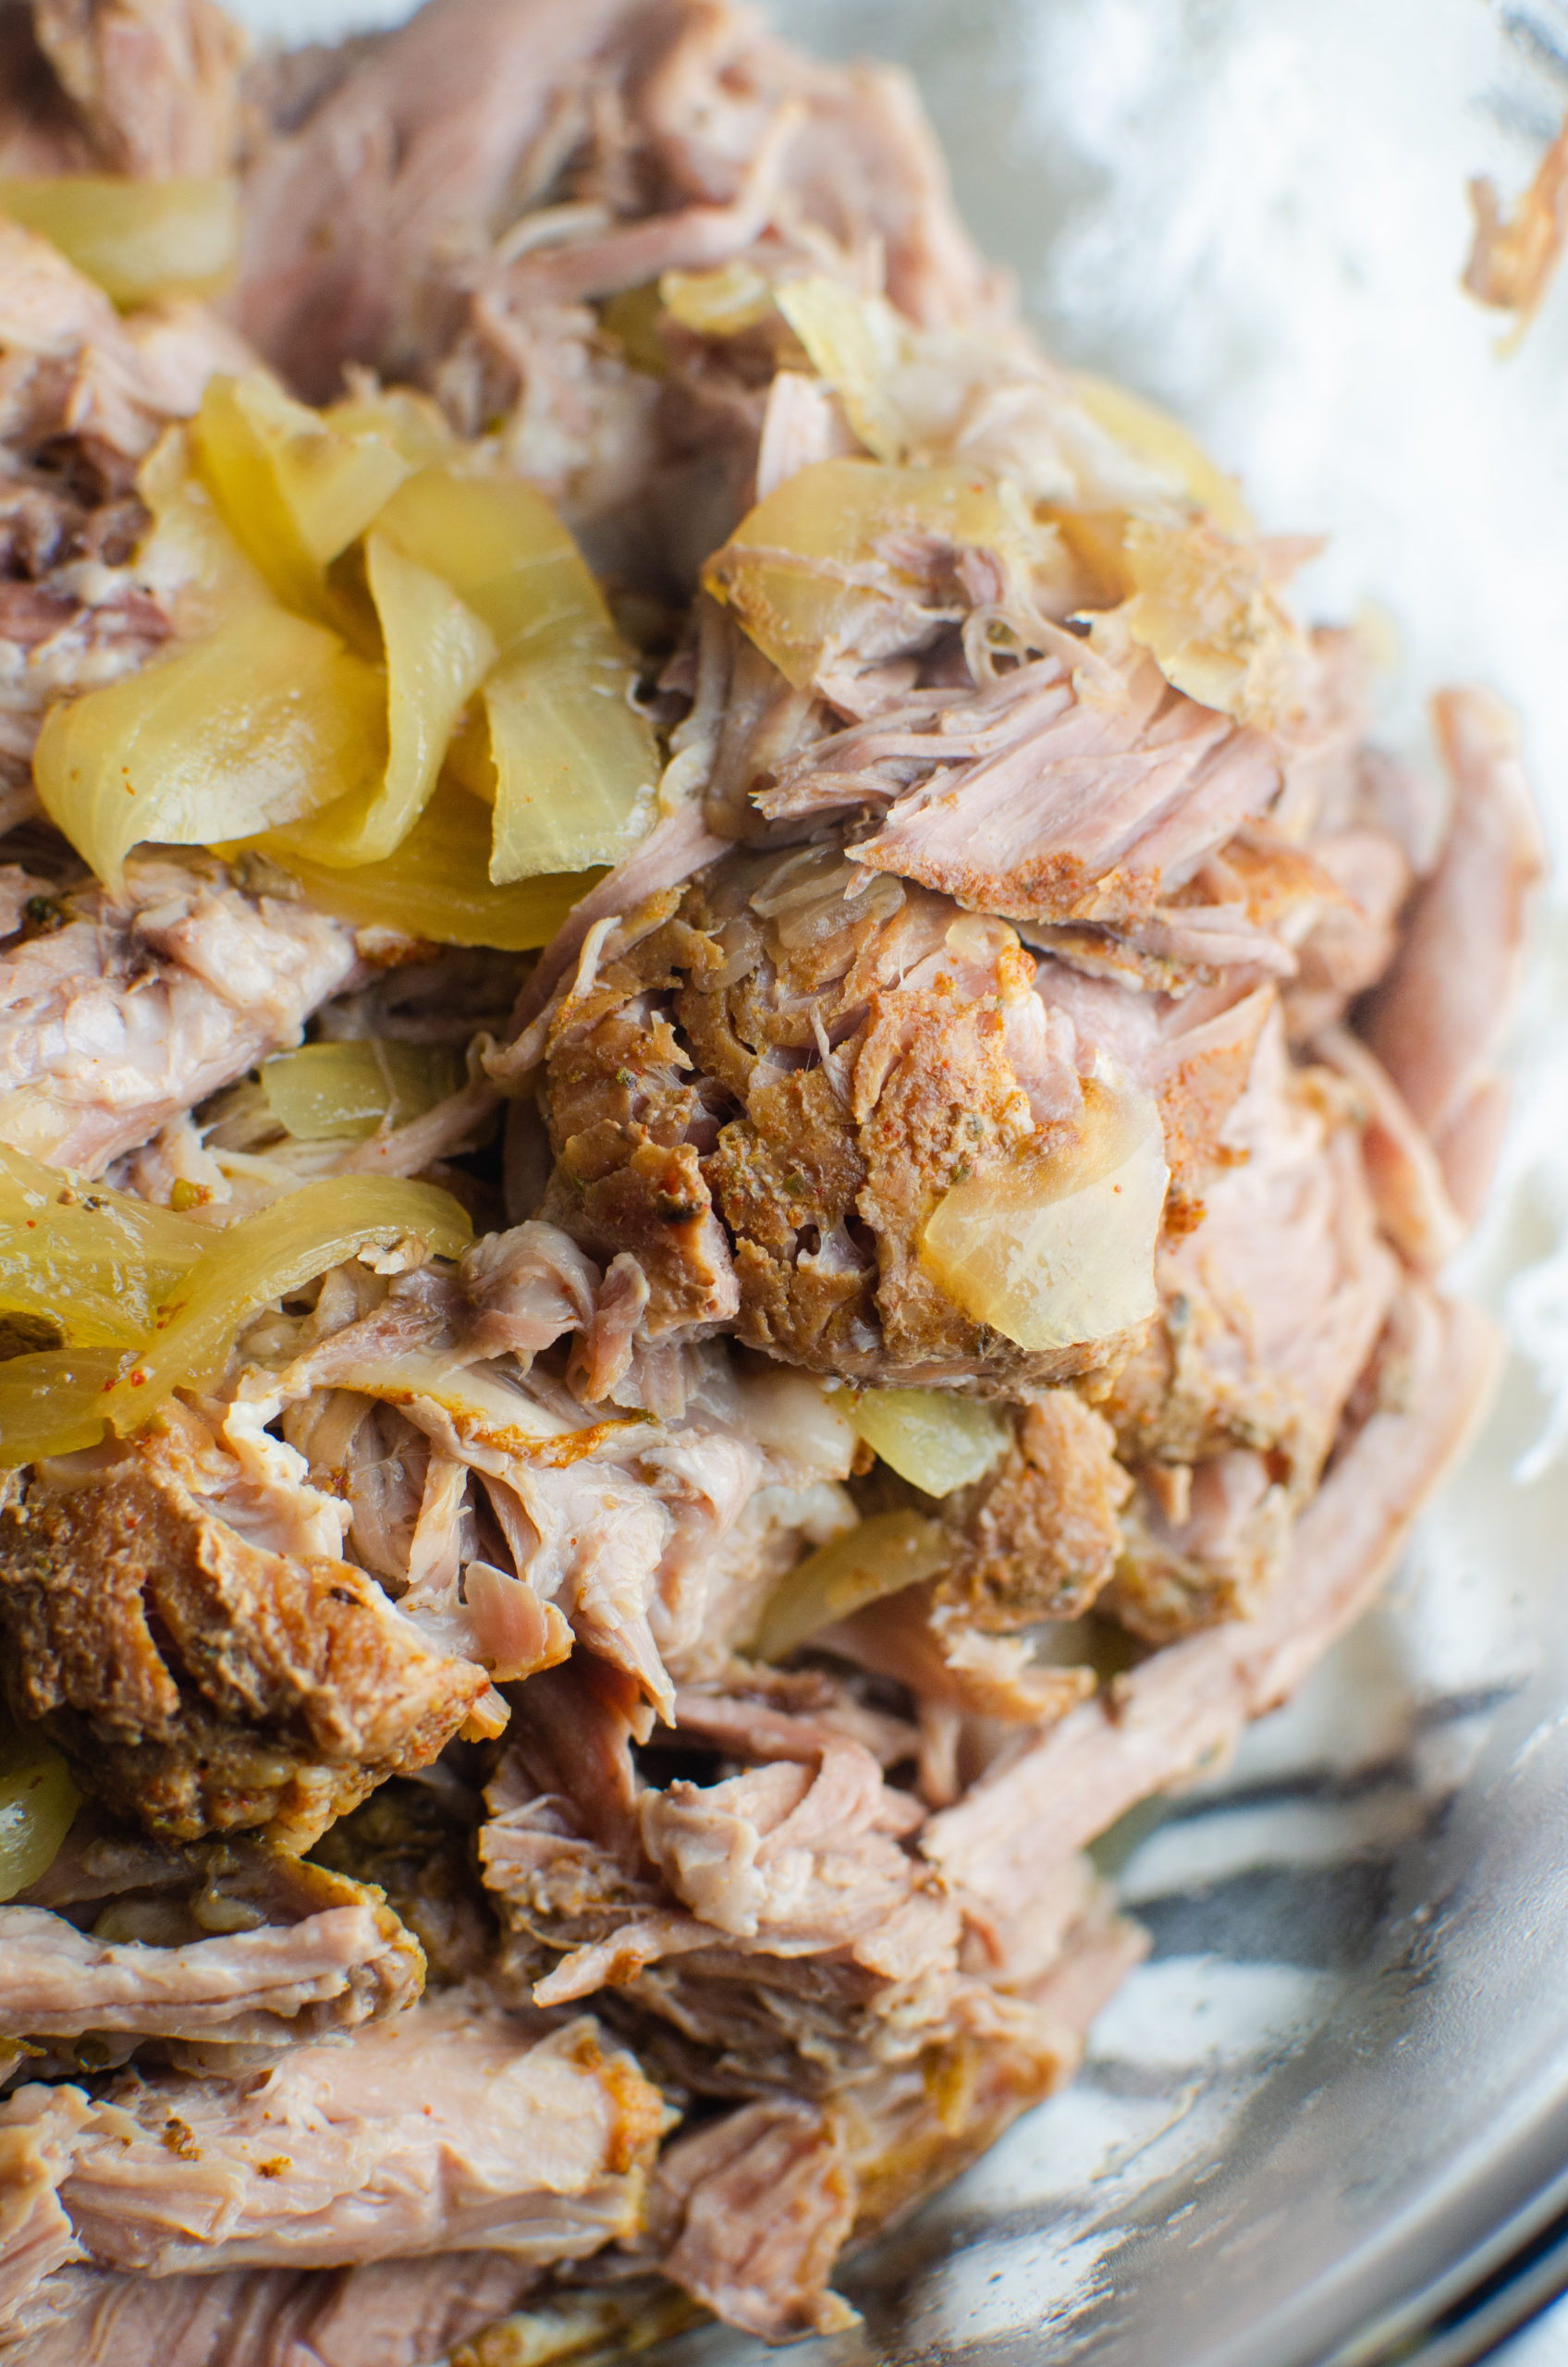 Pulled Pork Recipe (Slow Cooker Method) - Cooking Classy